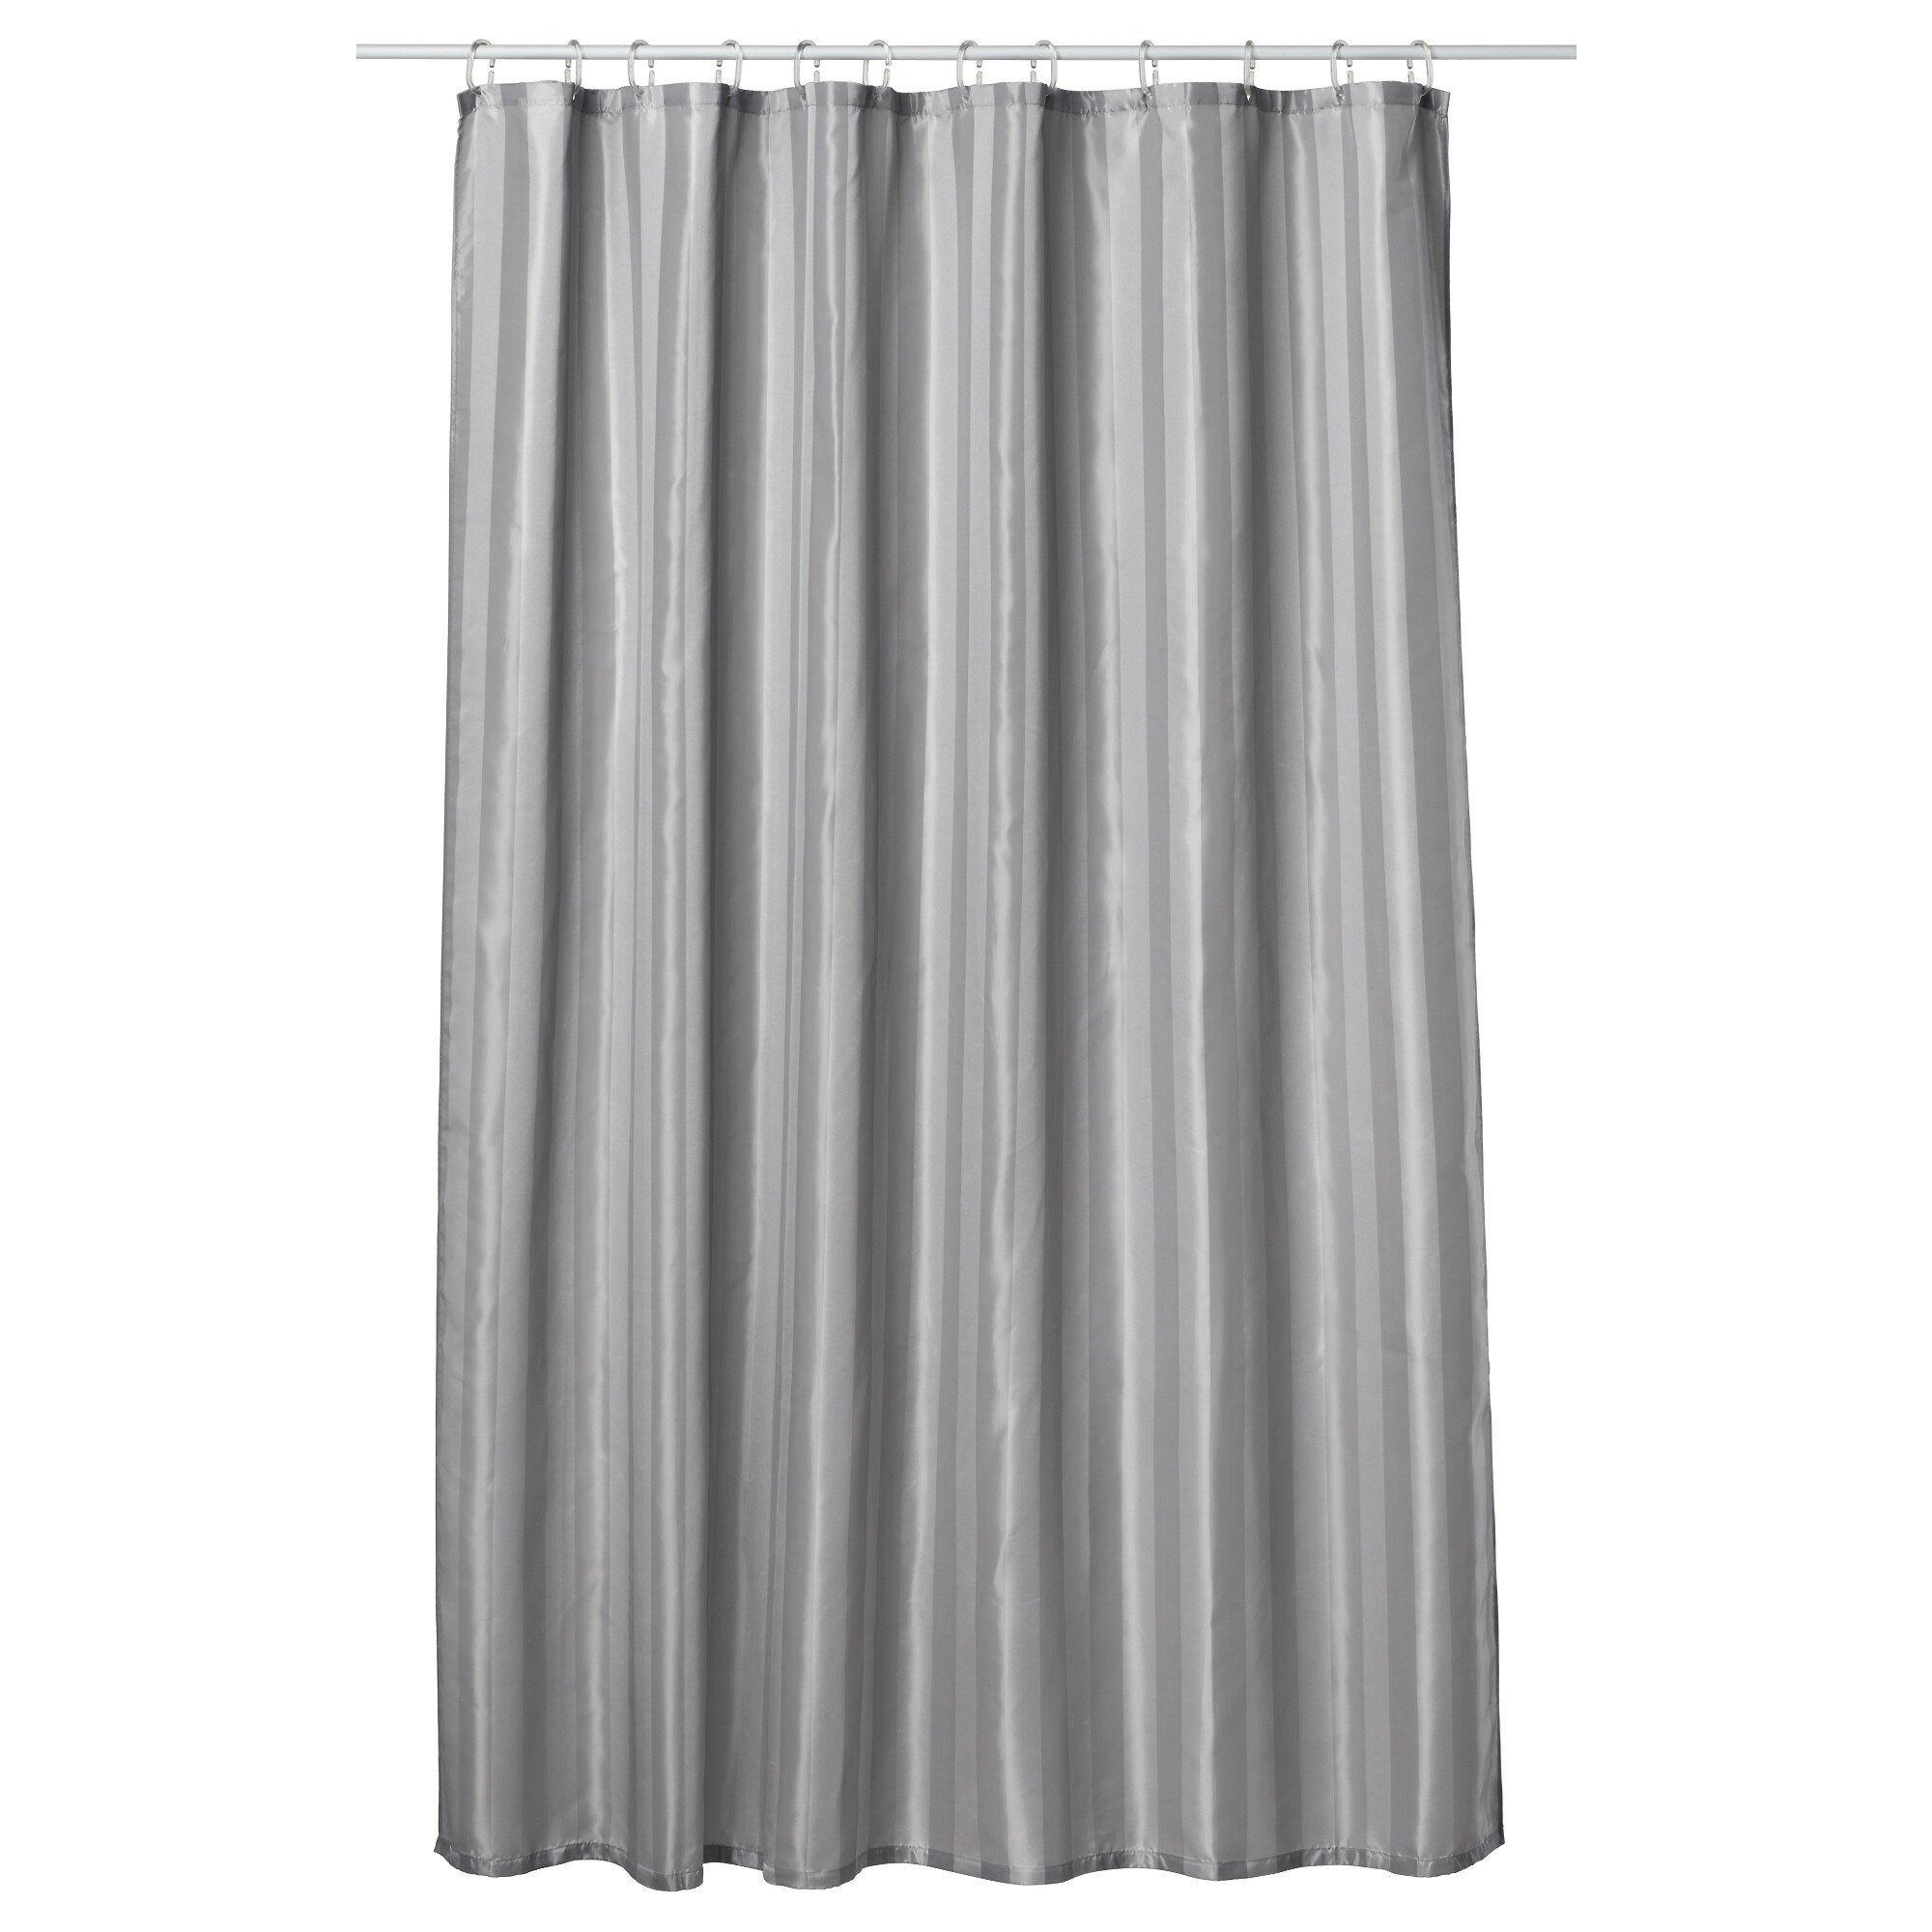 Ikea Shower Curtain for Best Your Bathroom Decoration: Ikea Shower Curtain | Grey And White Shower Curtains | Boys Shower Curtains